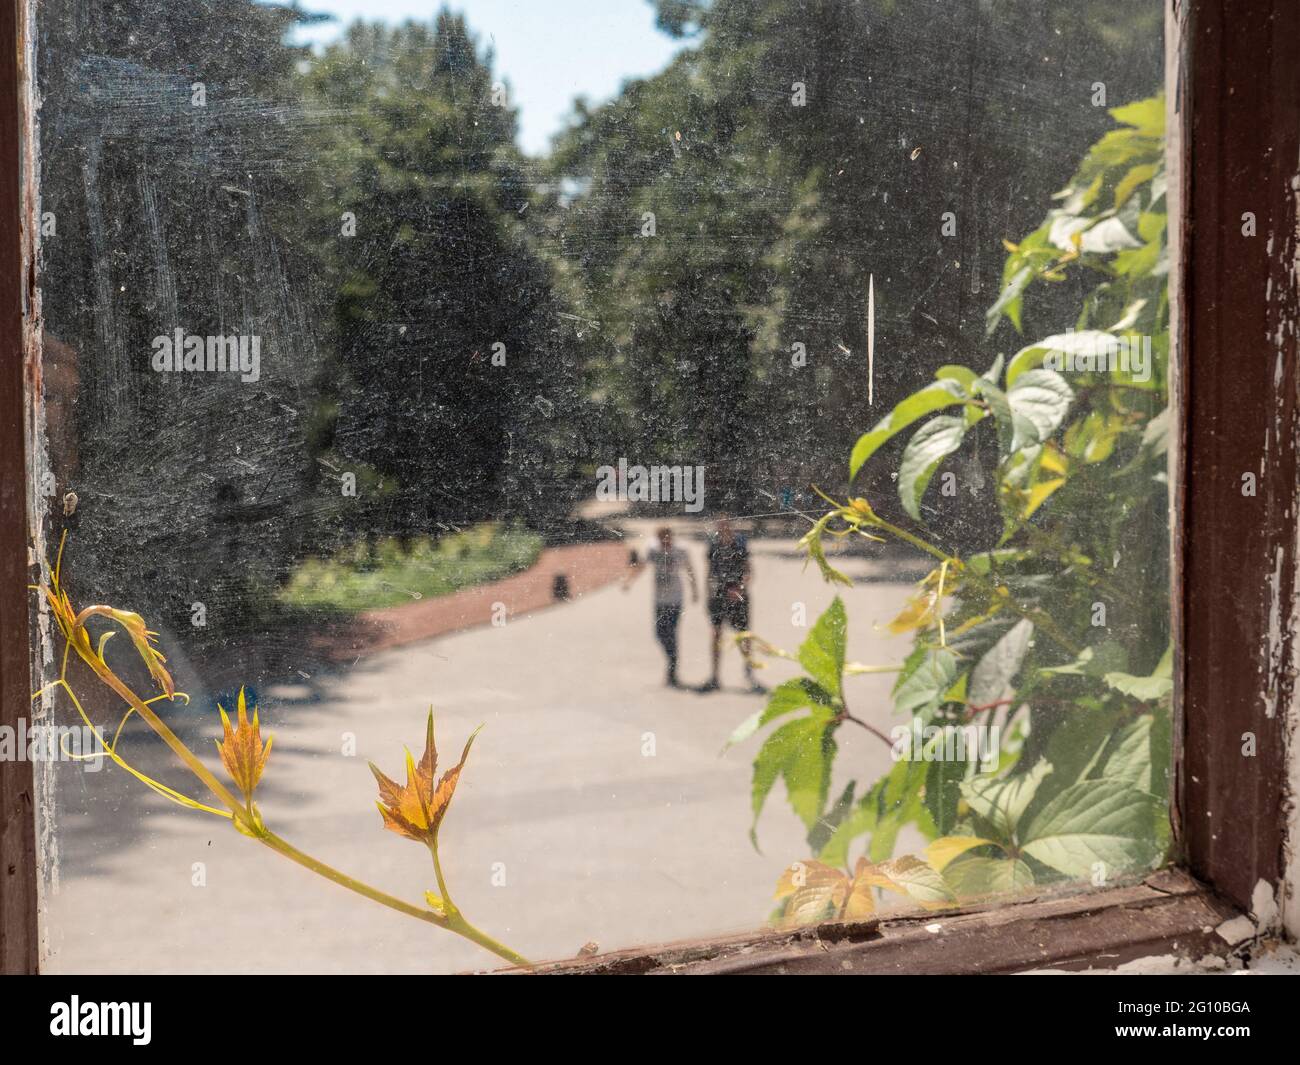 View through the scratched glass of a time-worn wooden window with old red paint over a crawling vine branch and blurry path in the park with people. Stock Photo